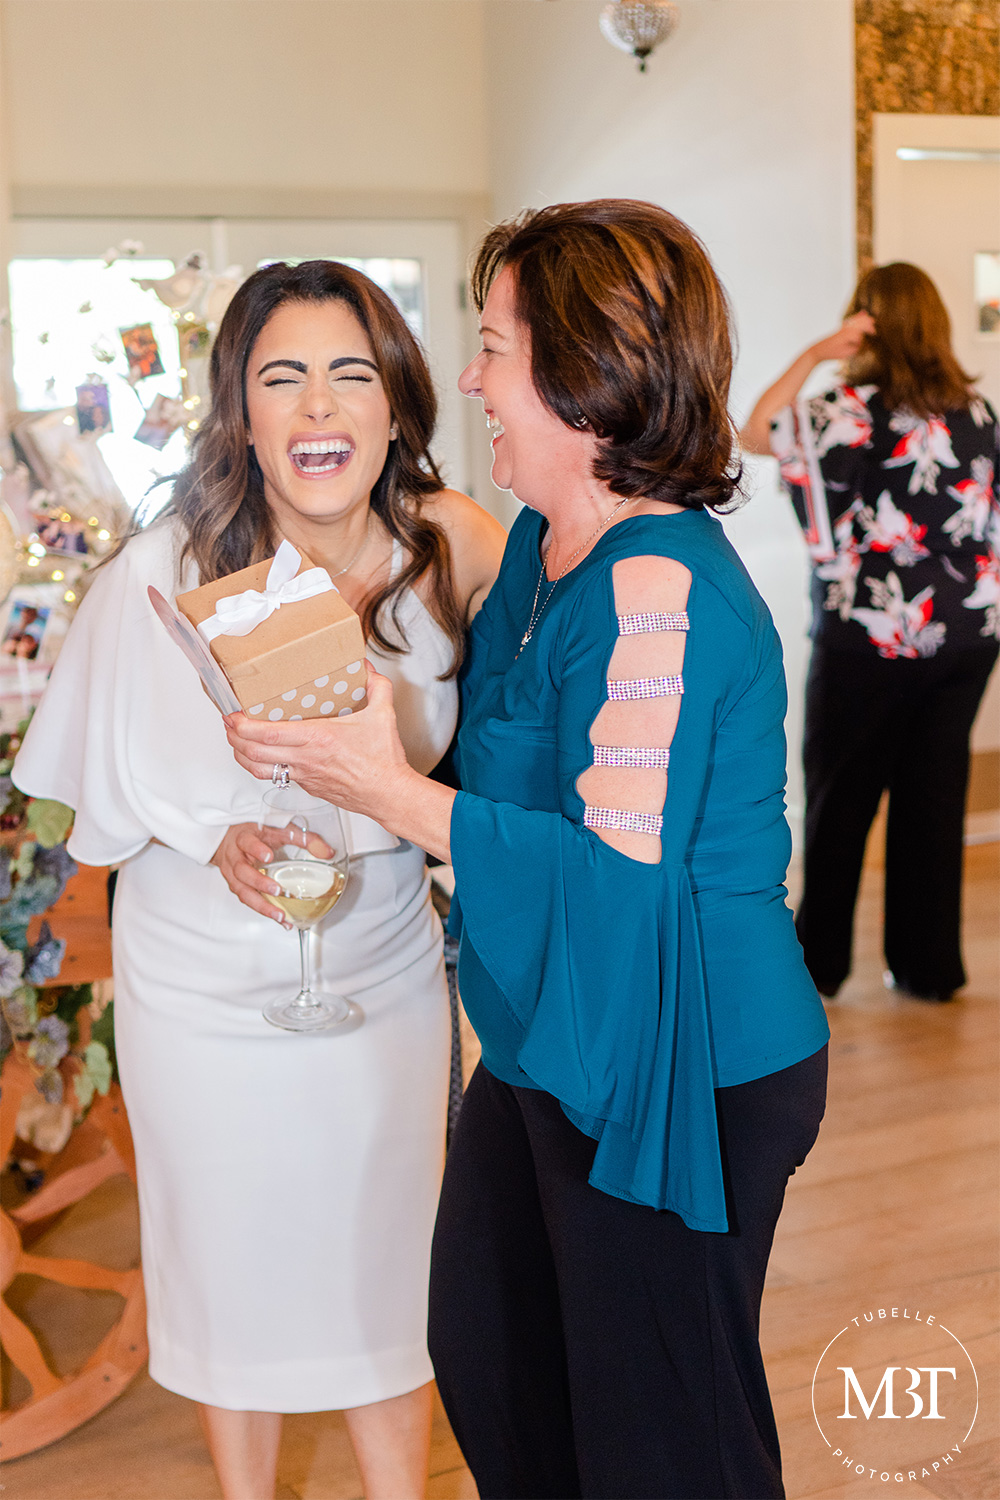 bride to be laughing with a guest during games, taken in Waterford, Virginia at a bridal shower covered by an event photographer in Virginia